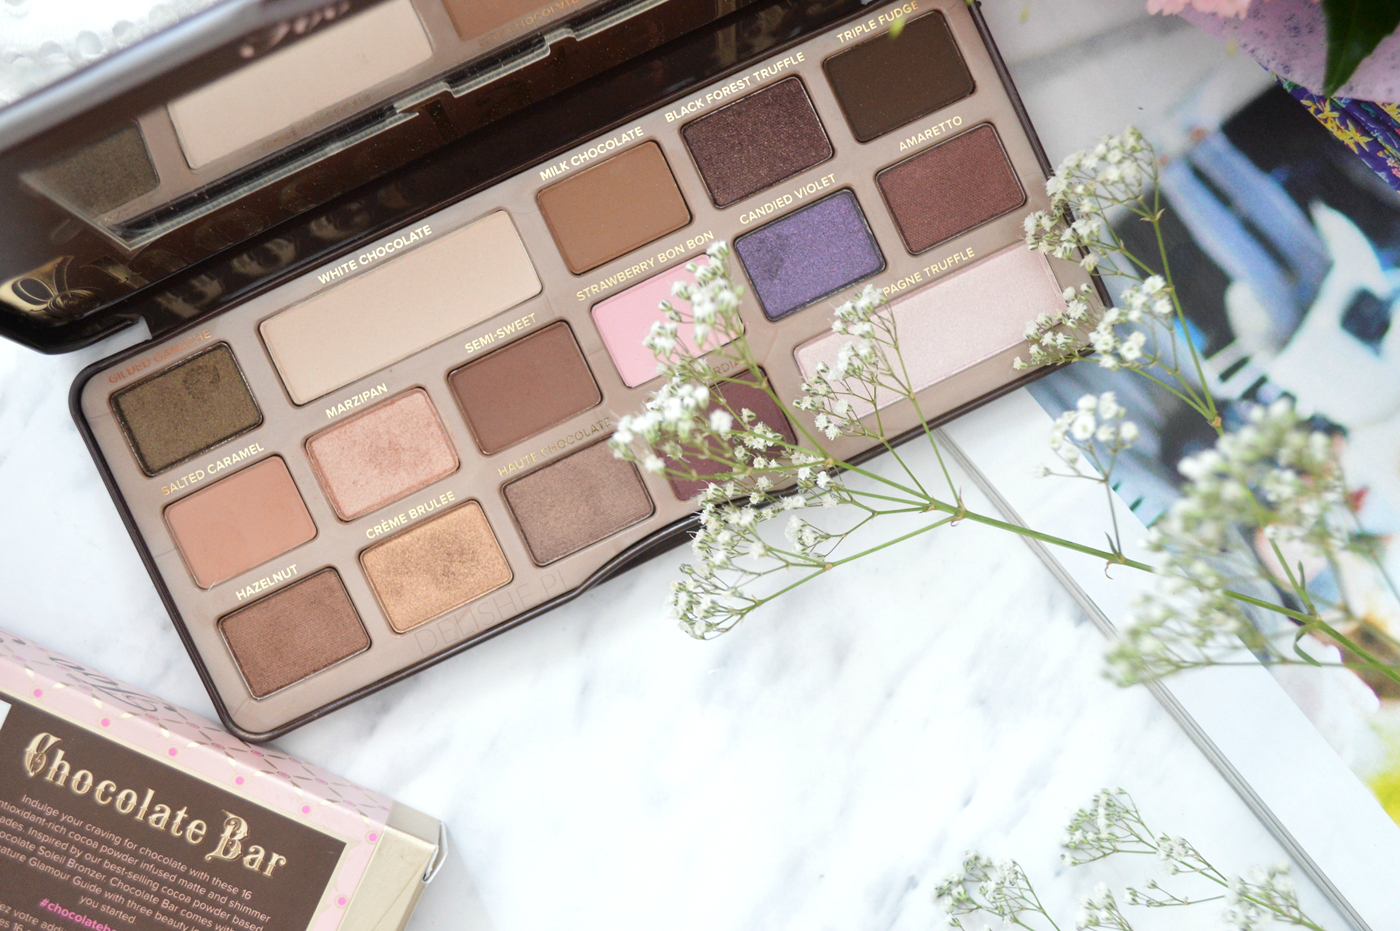 Chocolate Bar Too Faced palette